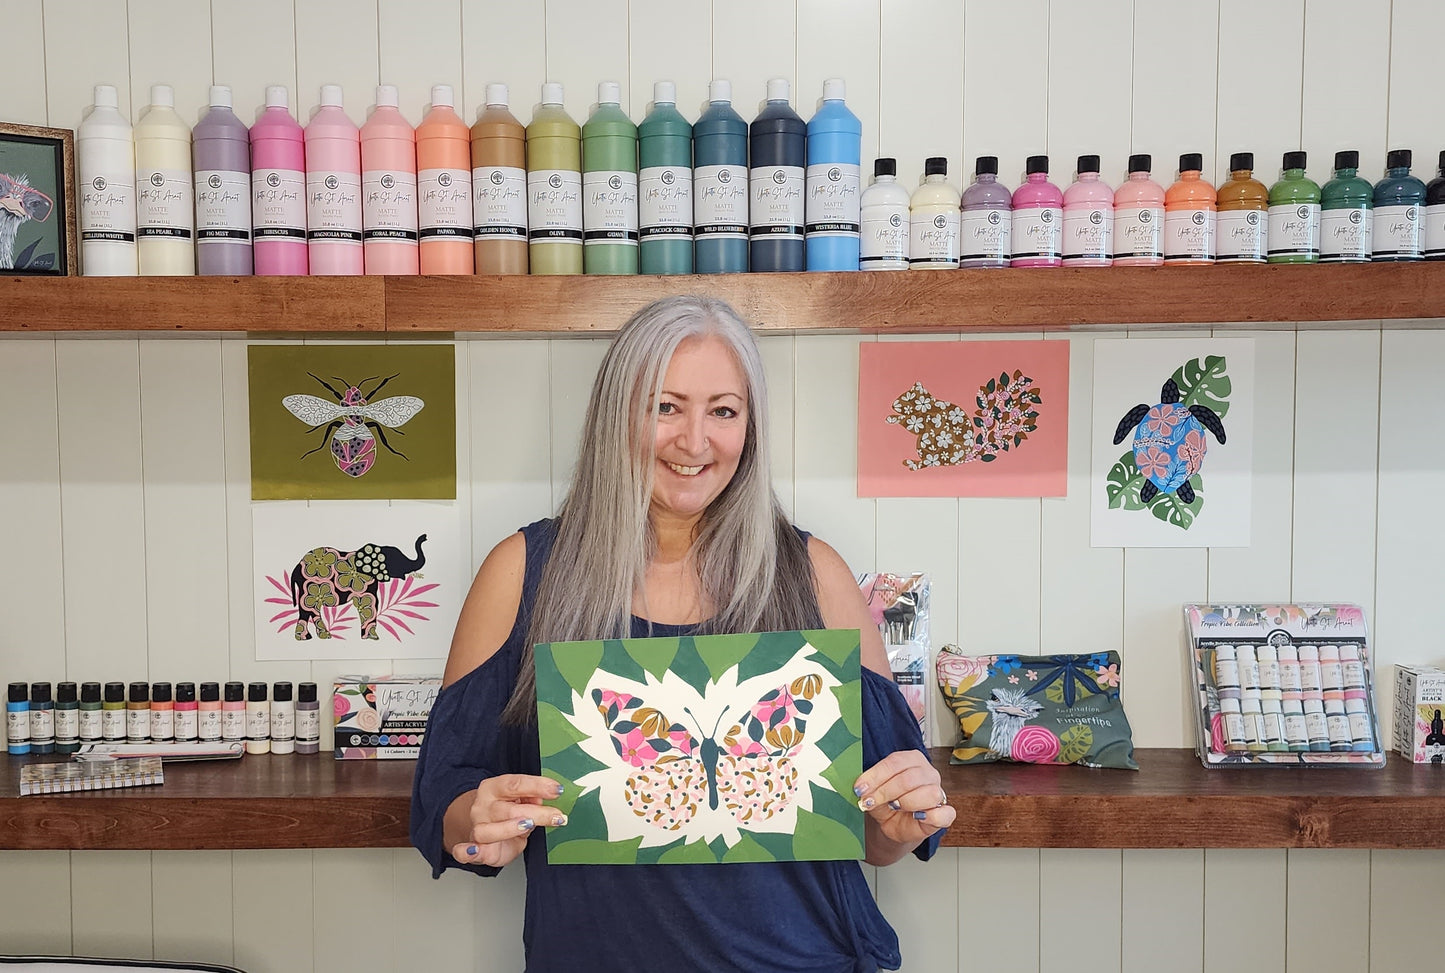 Paint Like a Designer - Patterns & Silhouettes With Yvette St. Amant